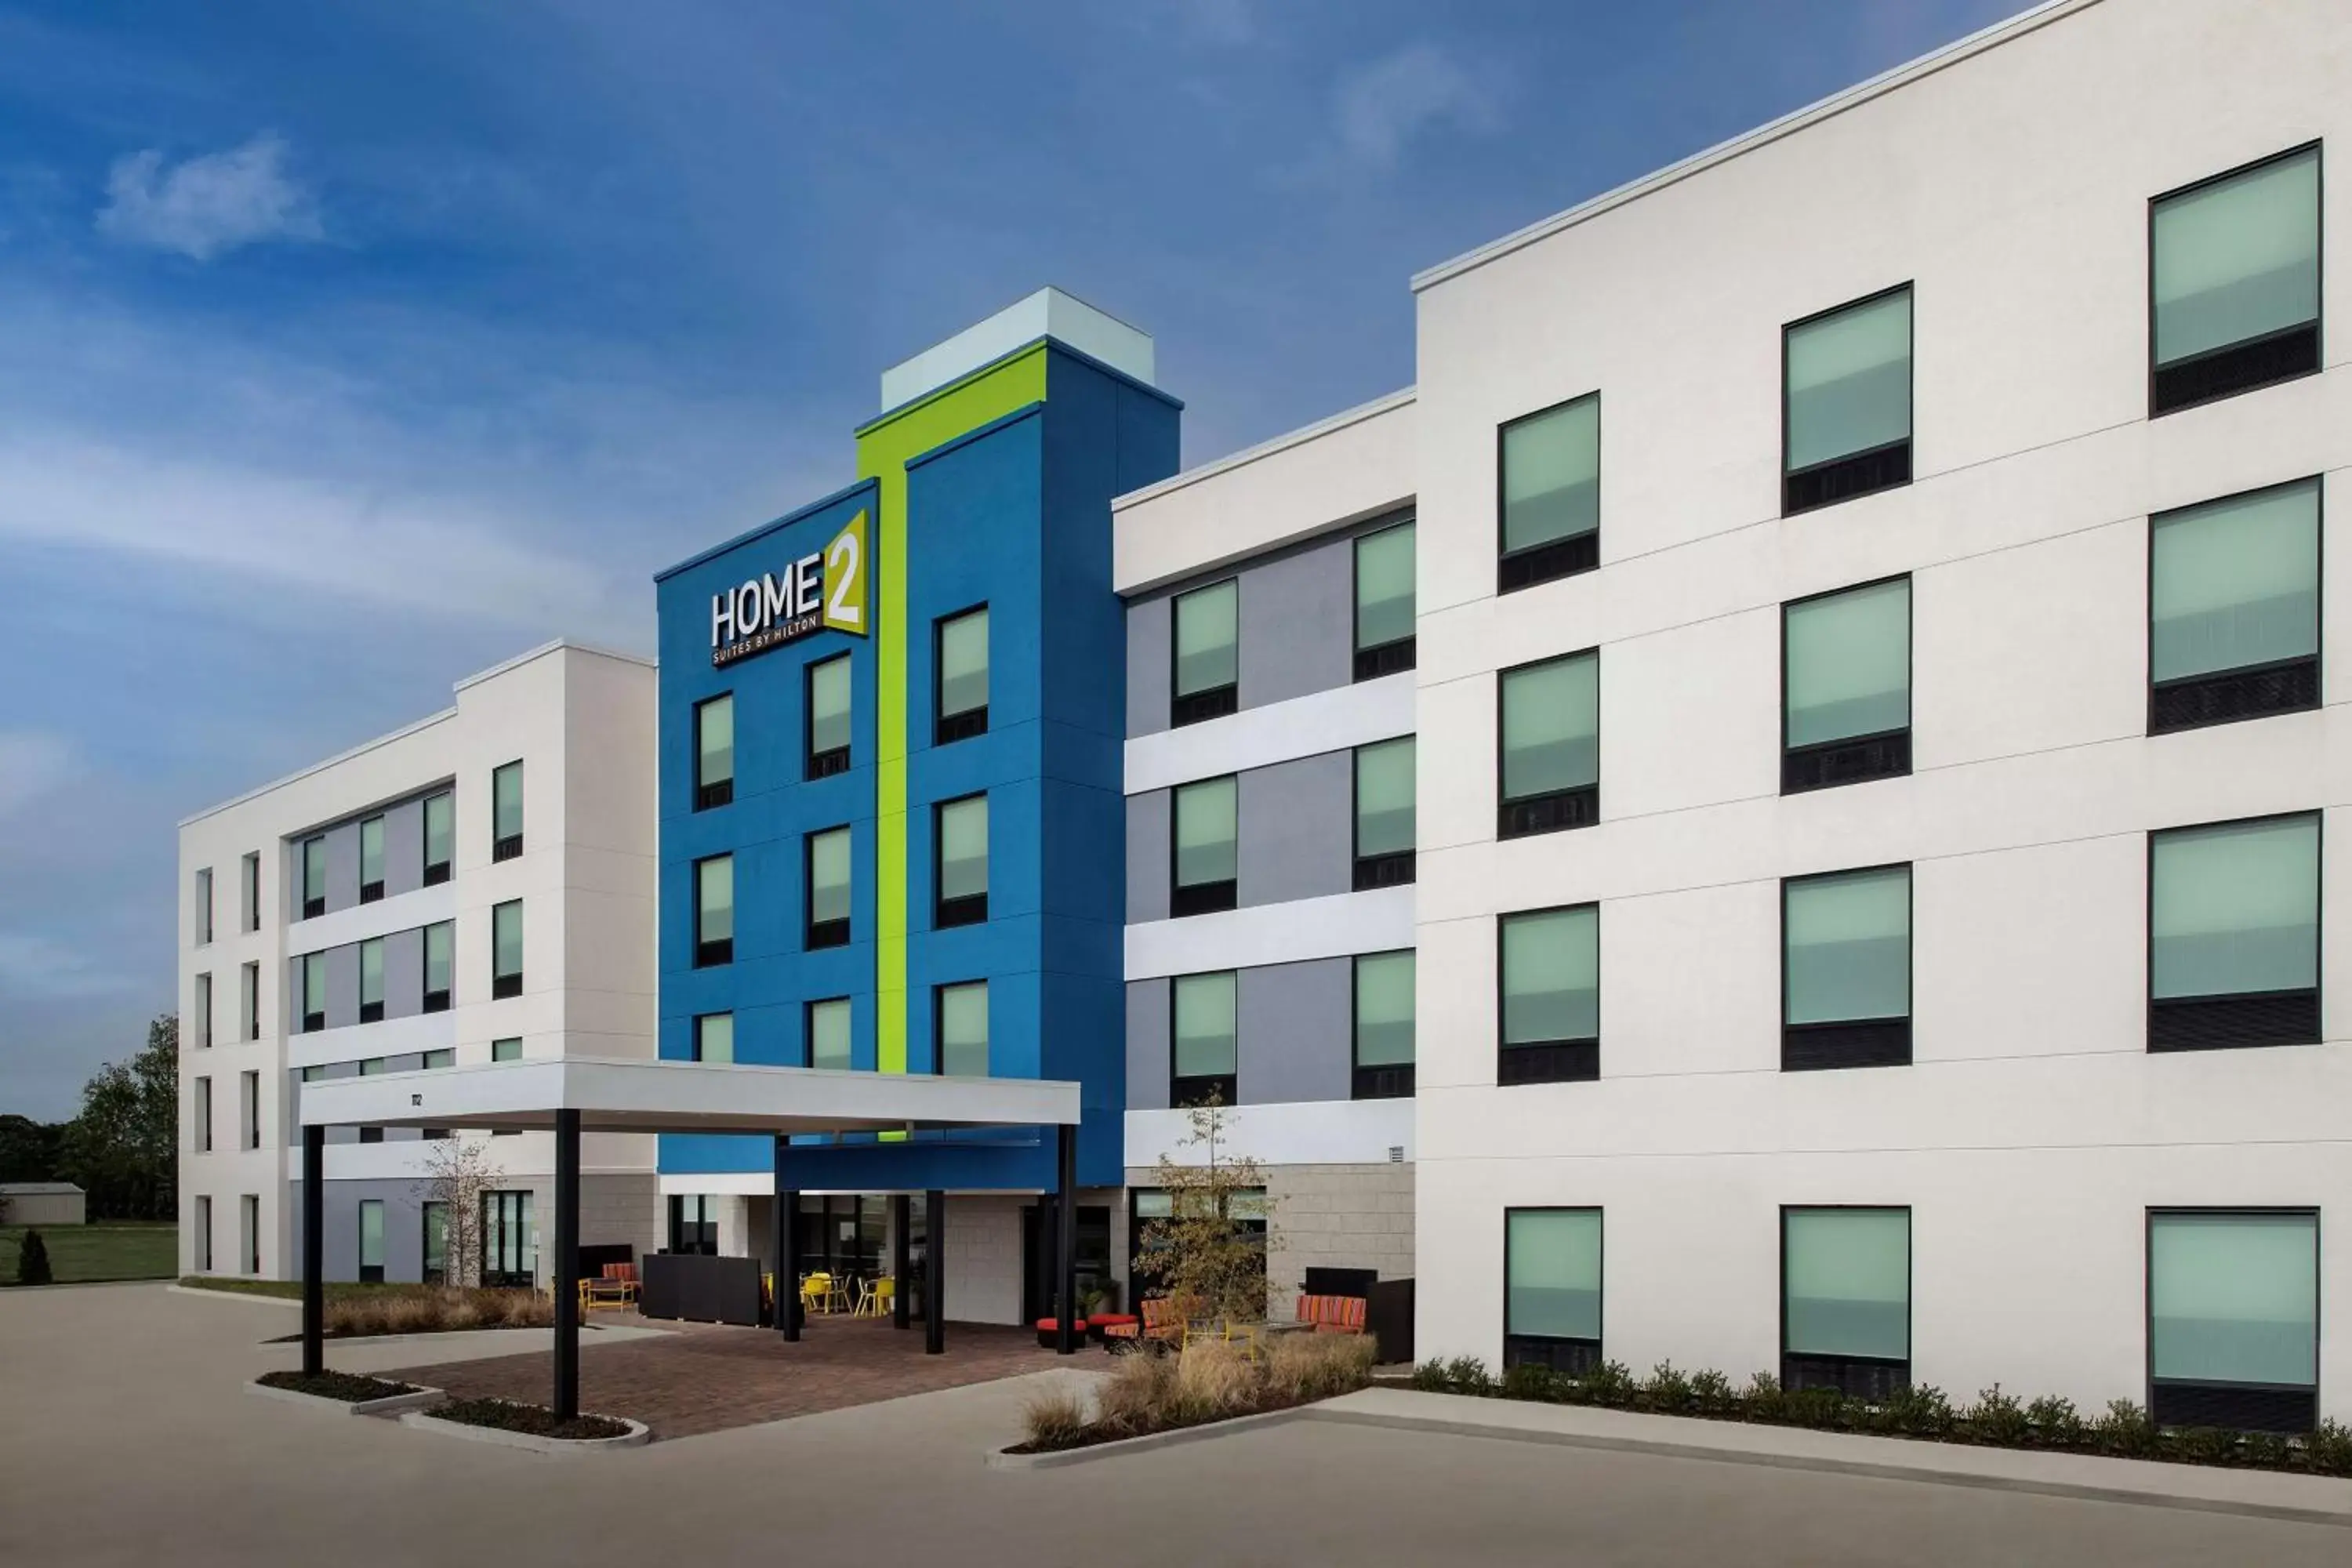 Property Building in Home2 Suites By Hilton Kenner New Orleans Arpt